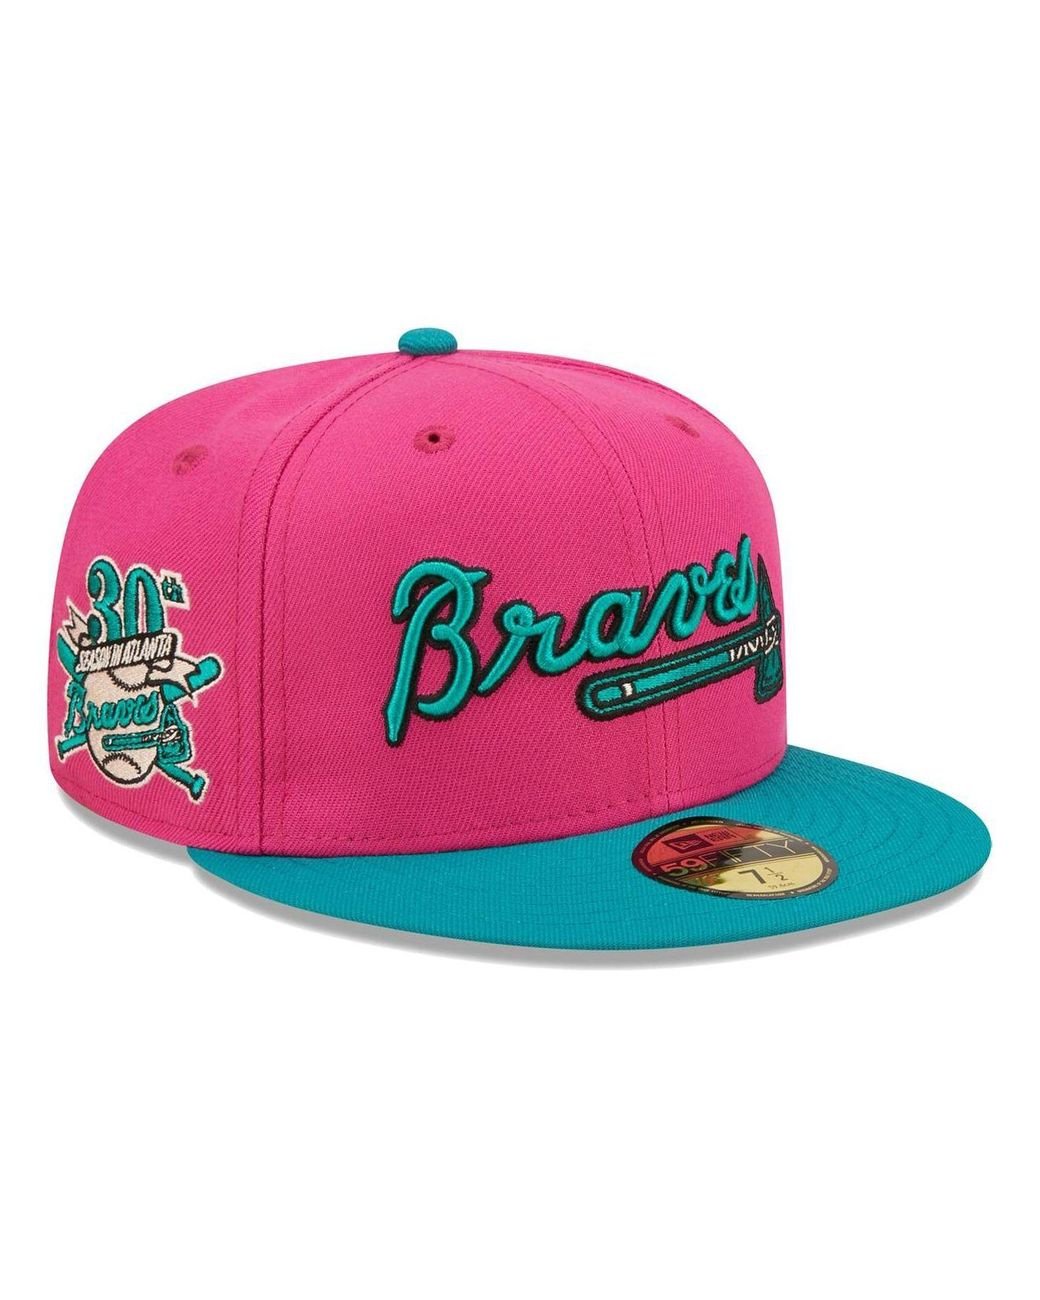 https://cdna.lystit.com/1040/1300/n/photos/macys/b1309789/ktz-Pink-Green-Pink-Green-Atlanta-Braves-Cooperstown-Collection-Passion-Forest-59fifty-Fitted-Hat.jpeg